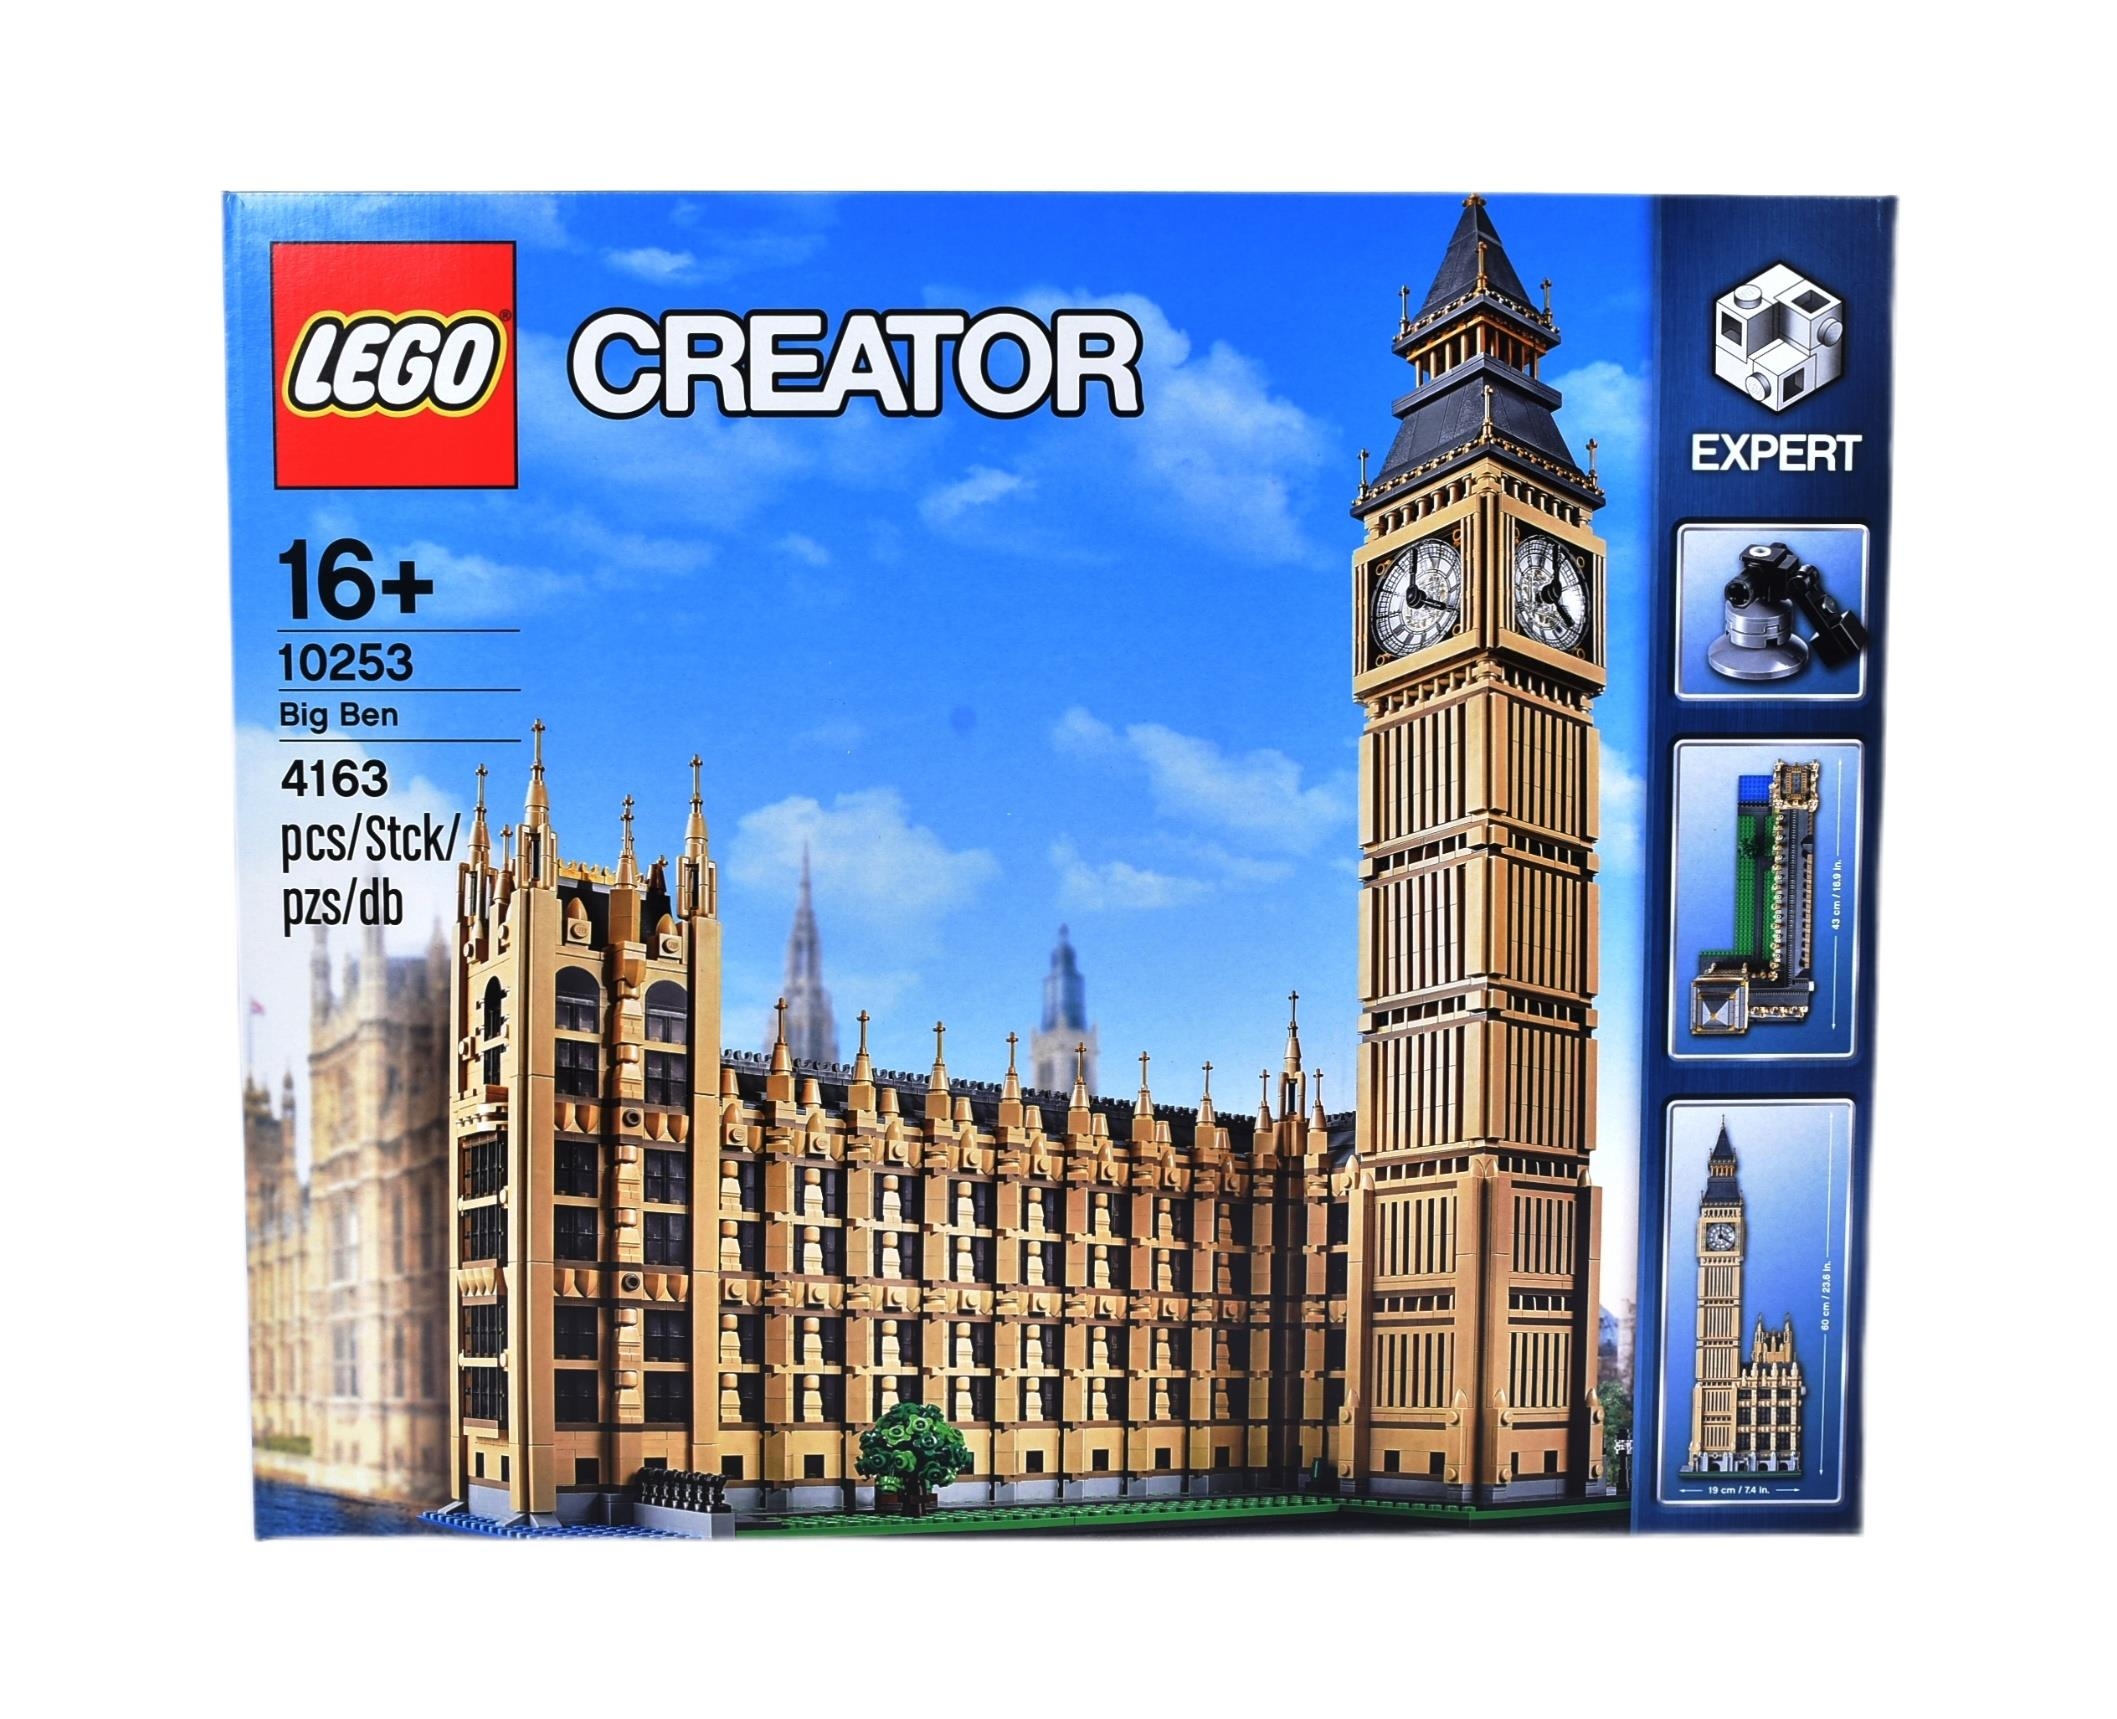 Smidighed skandale Shredded Lego Set - Creator - a factory sealed Lego Creator Big Ben set. No: 10253.  As new. Retired product.